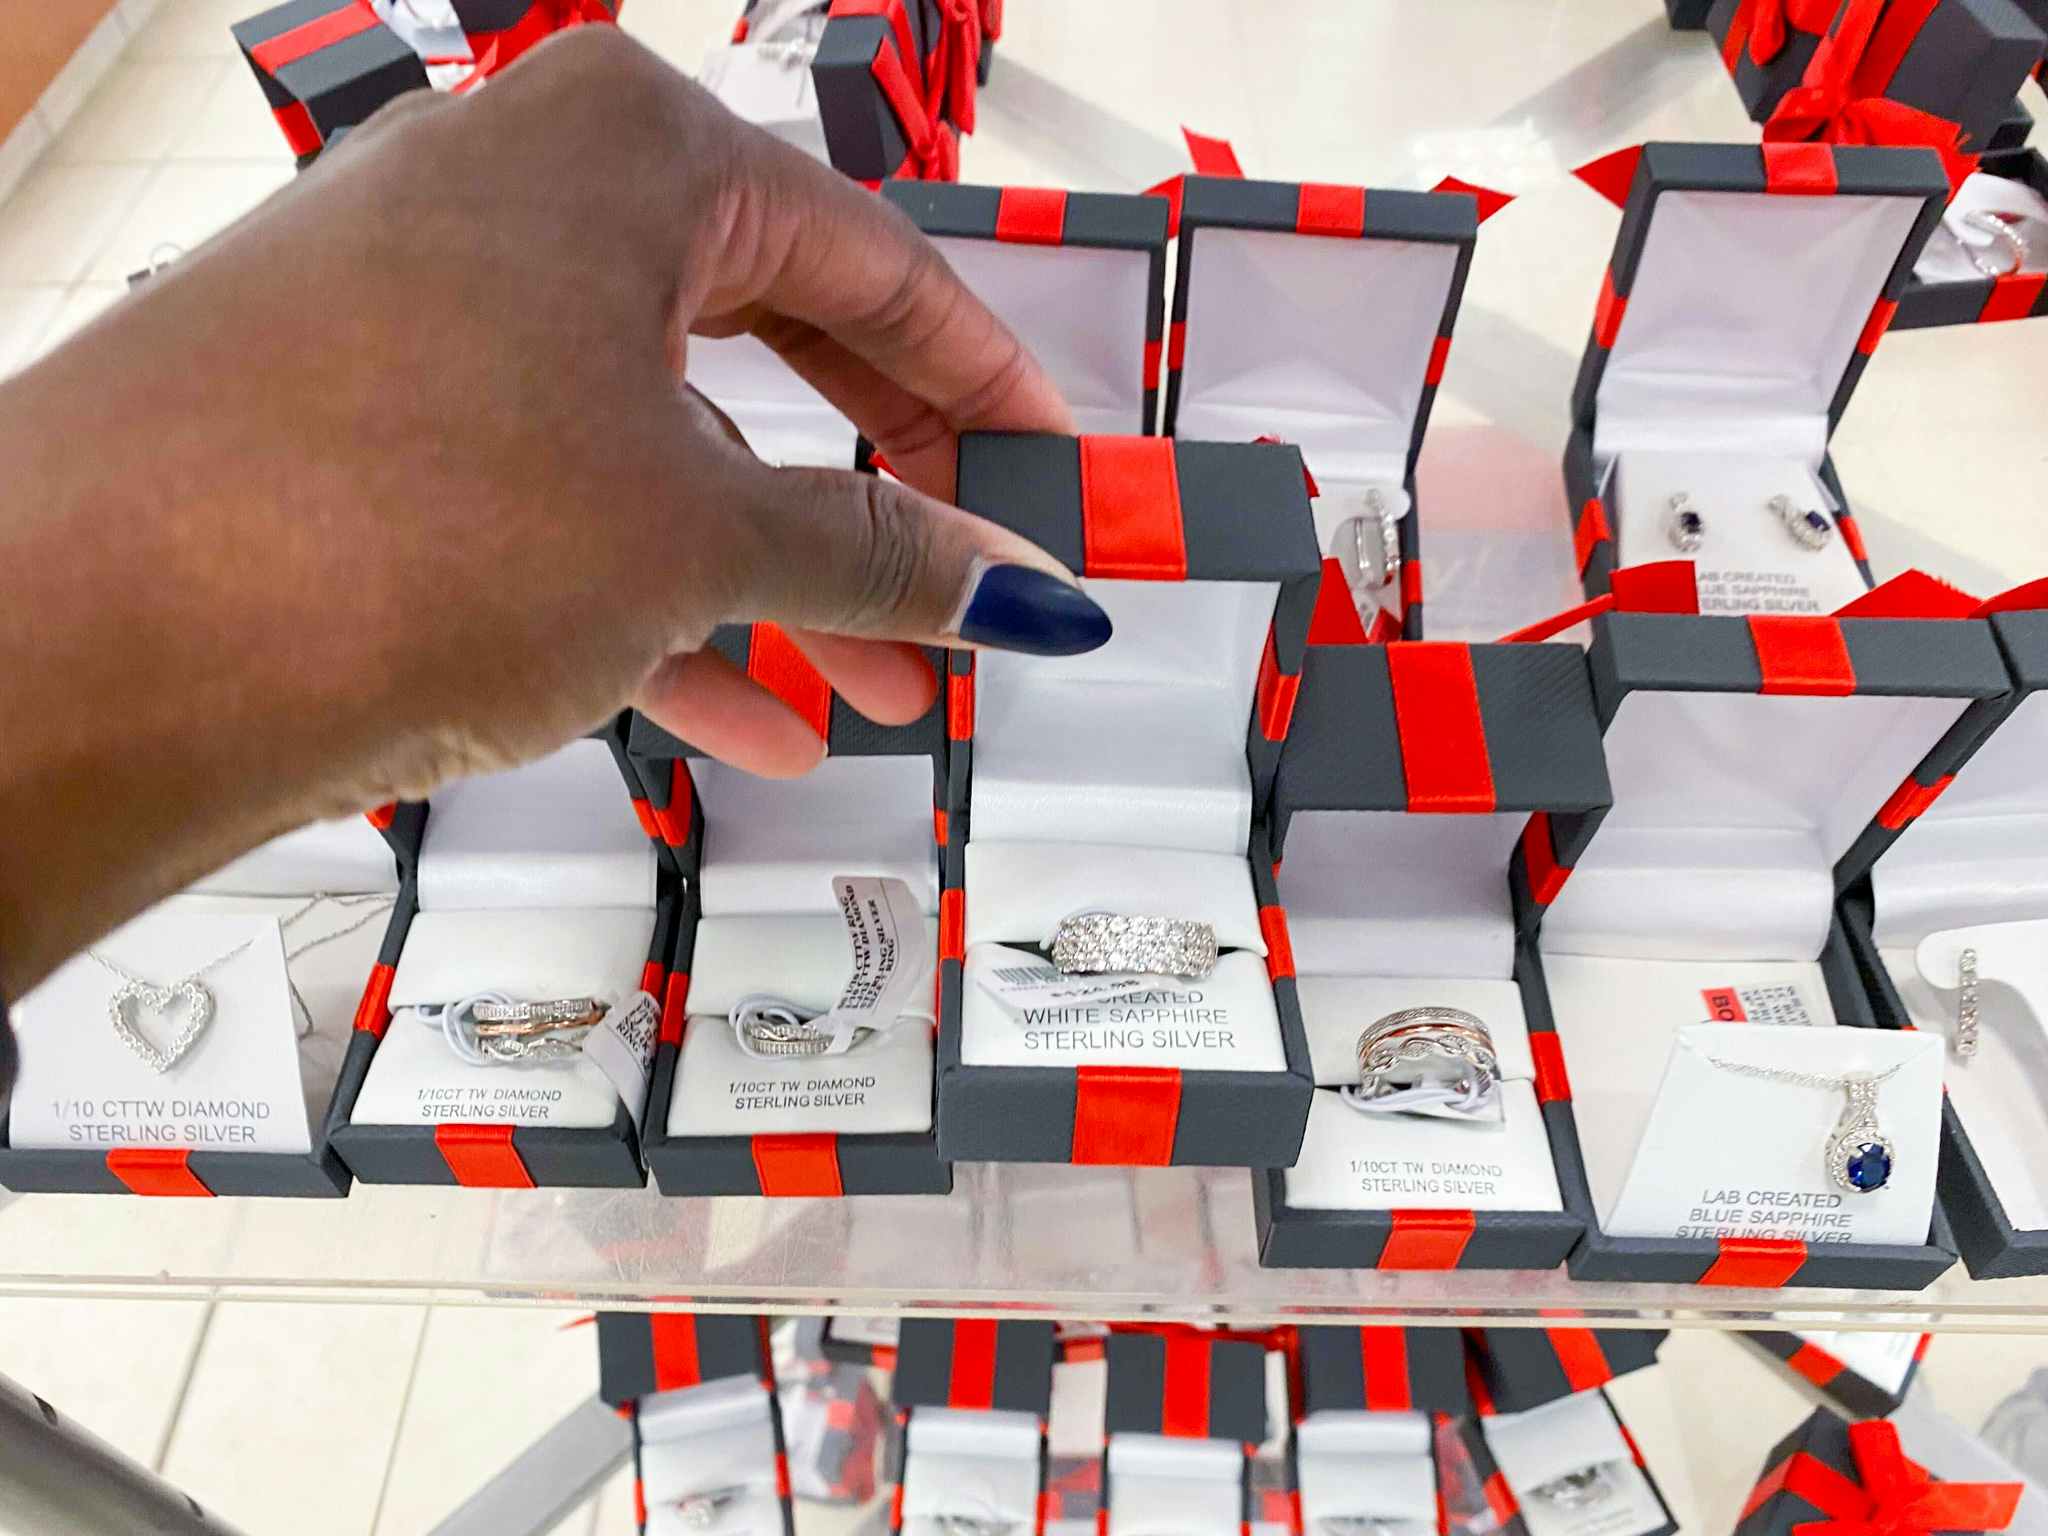 A person's hand picking up a ring in a box from a display of jewelry at JCPenney.